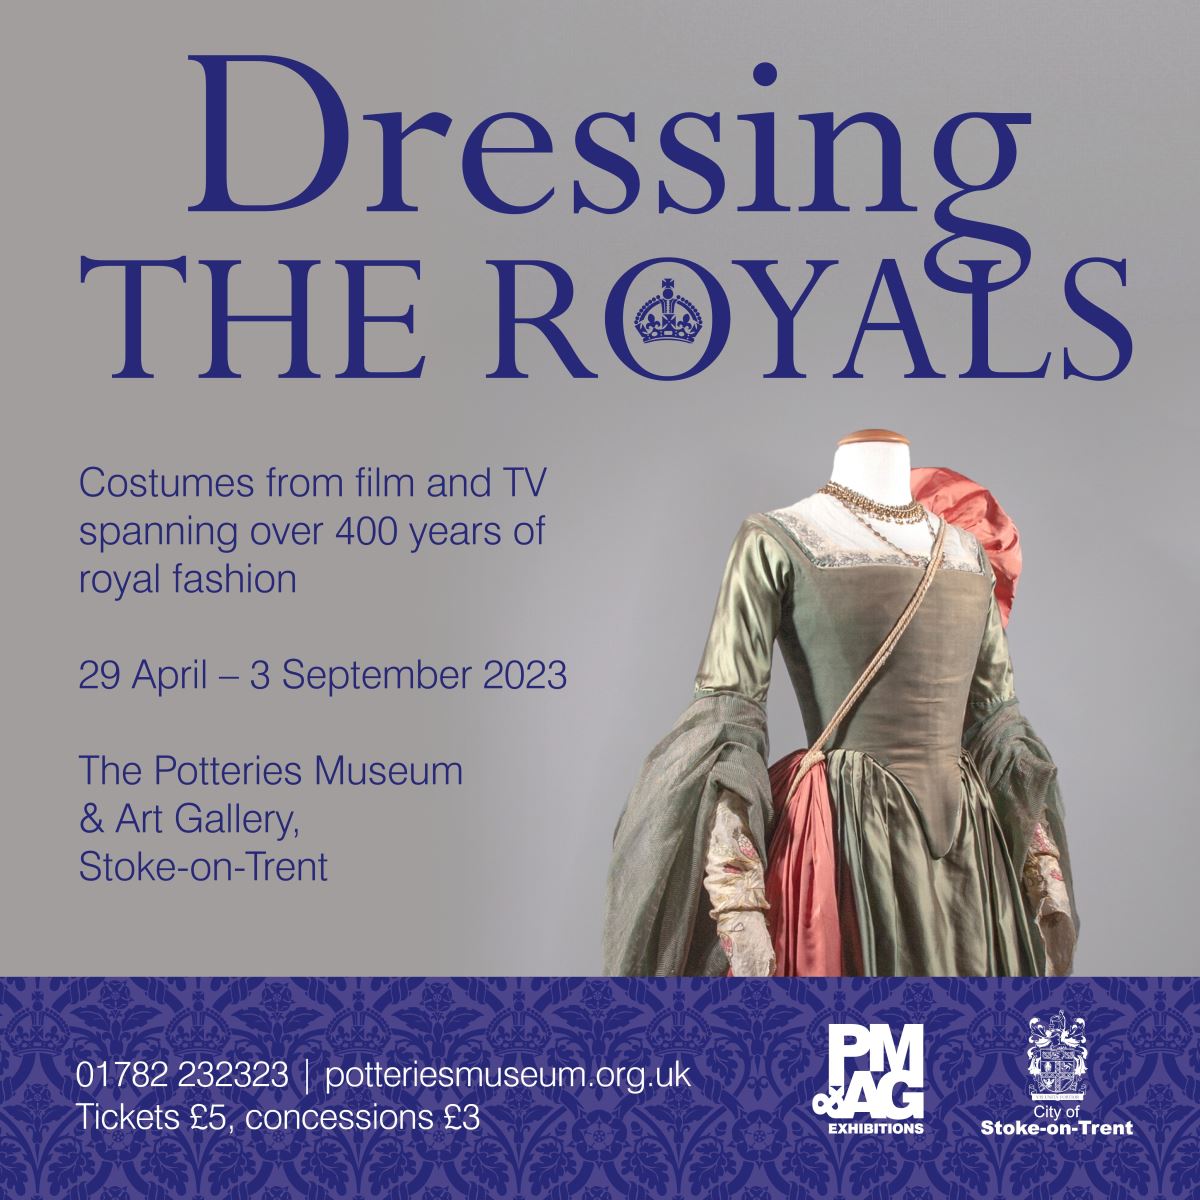 Dressing The Royals at The Potteries Museum & Art Gallery